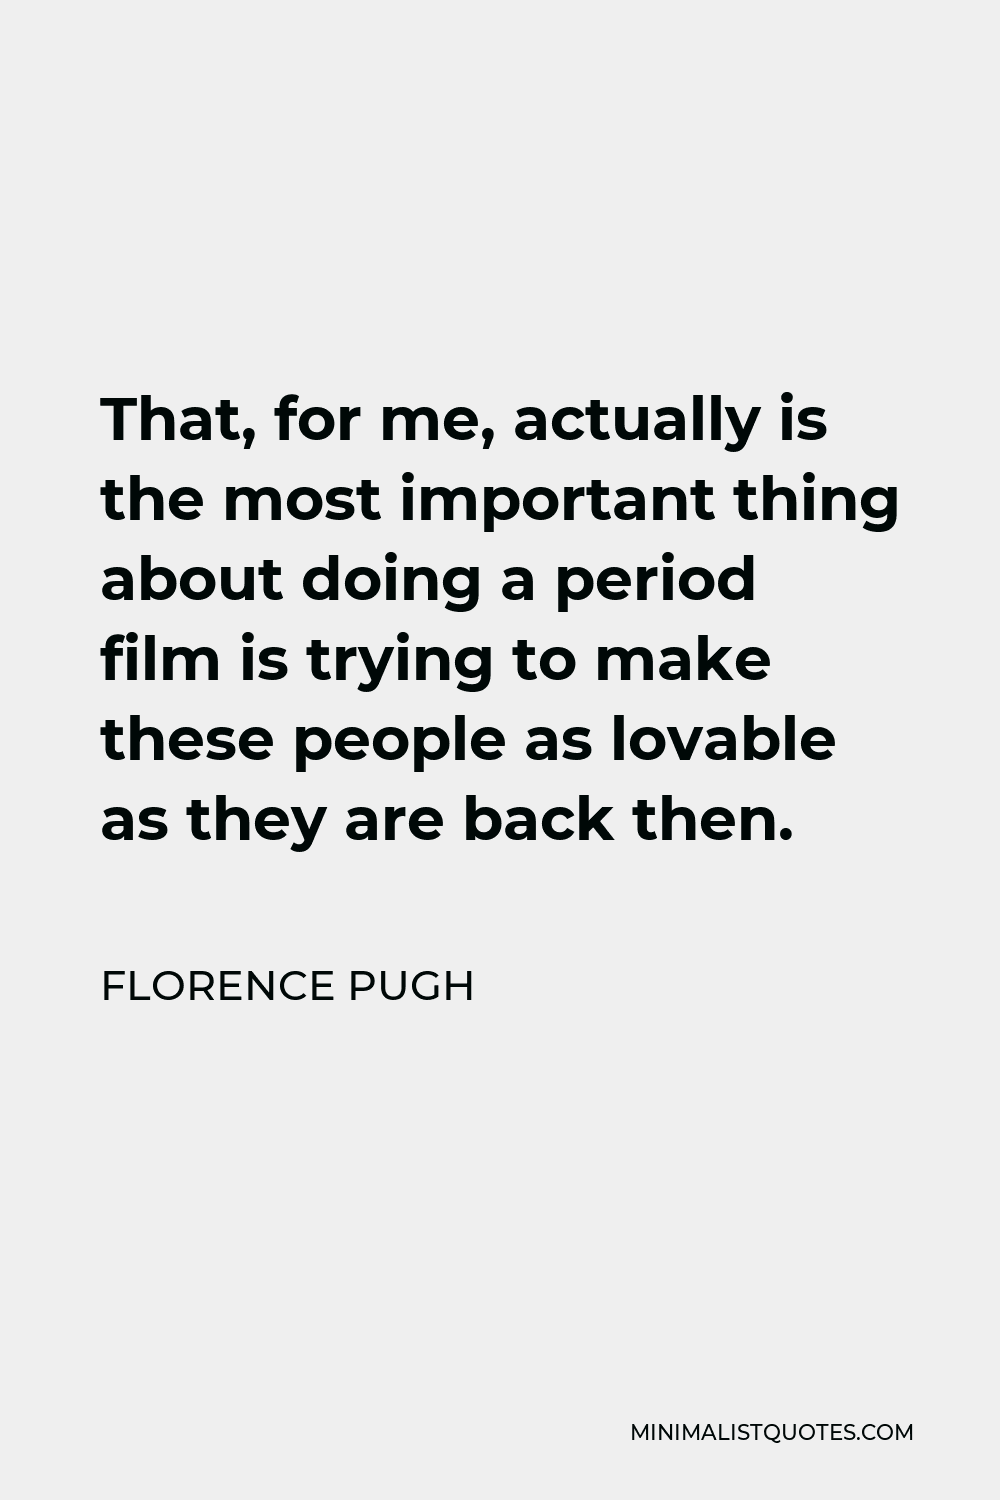 Florence Pugh Quote - That, for me, actually is the most important thing about doing a period film is trying to make these people as lovable as they are back then.